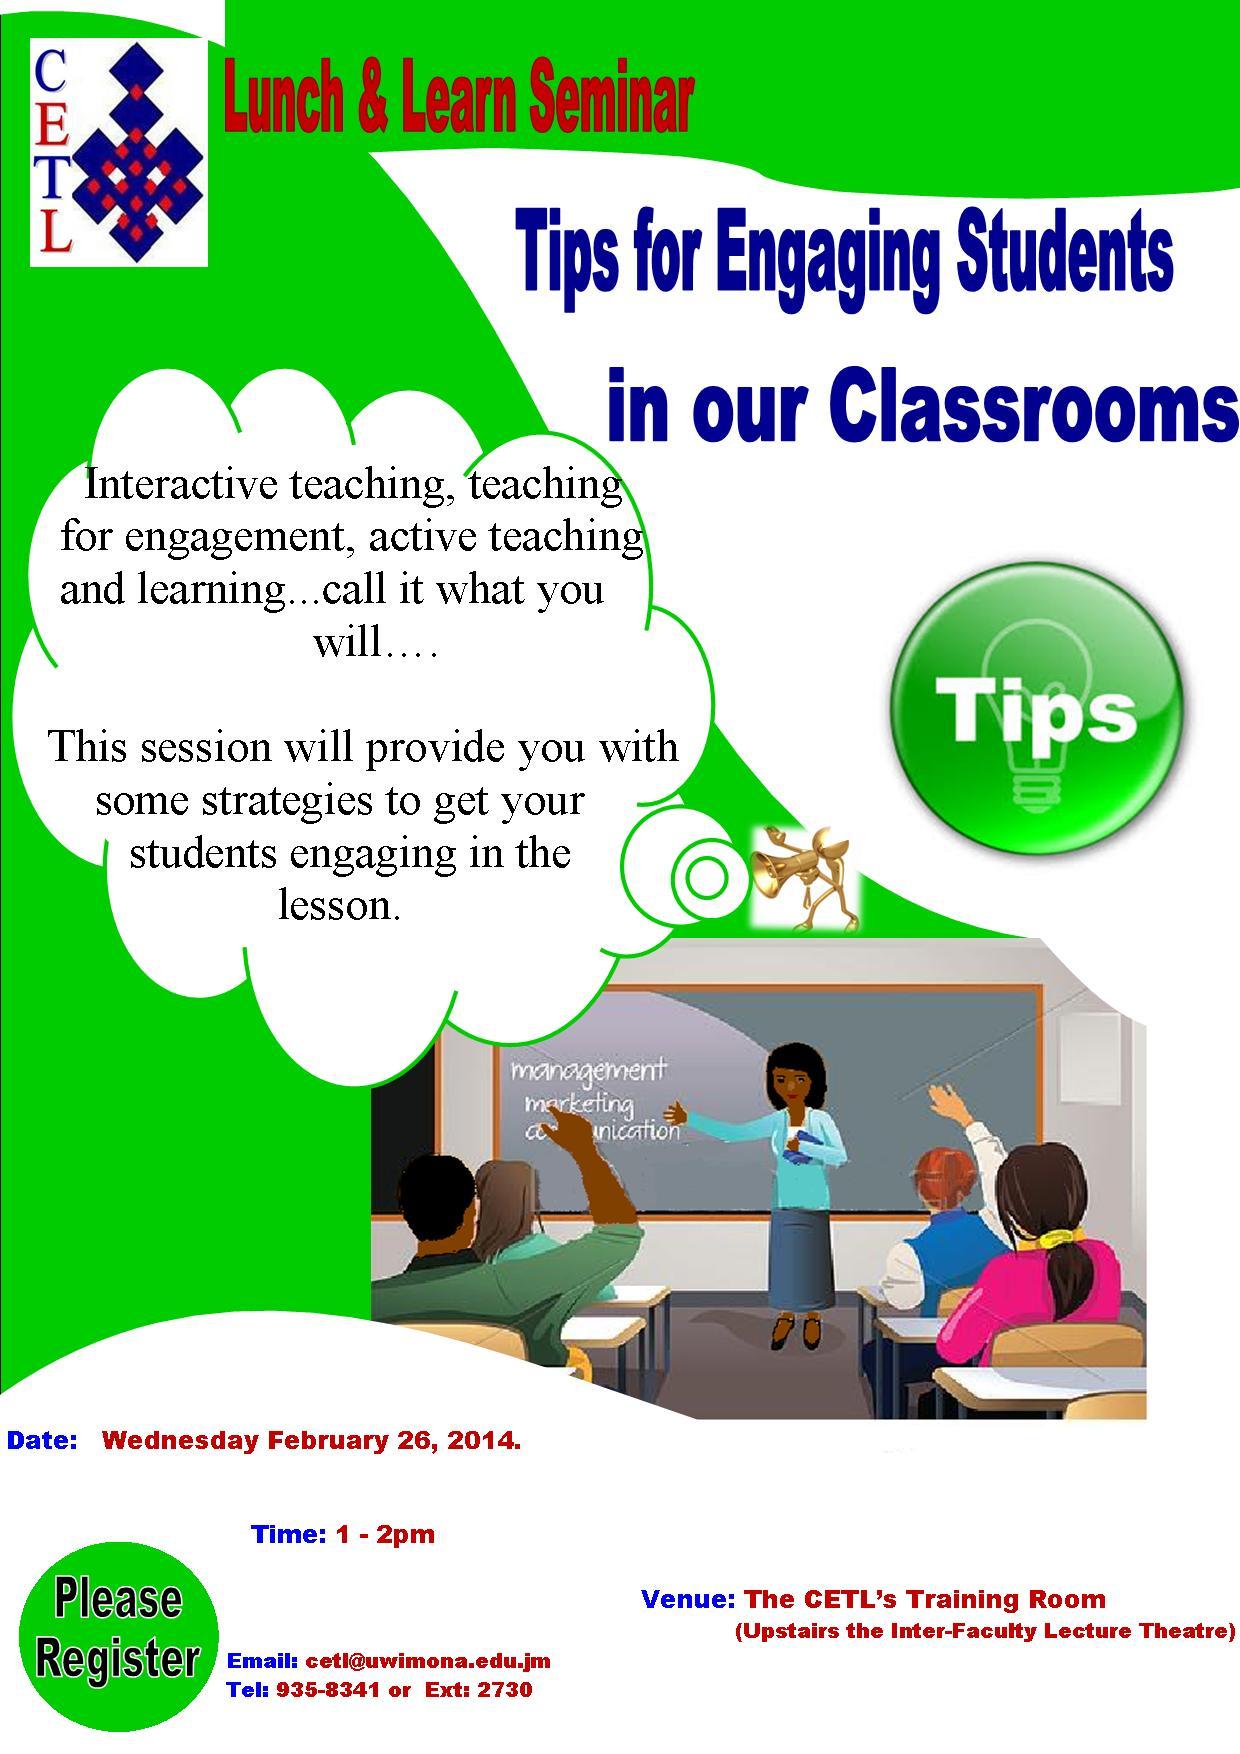 CETL's Lunch and Learn Seminar - Tips for Engaging Students in our Classrooms